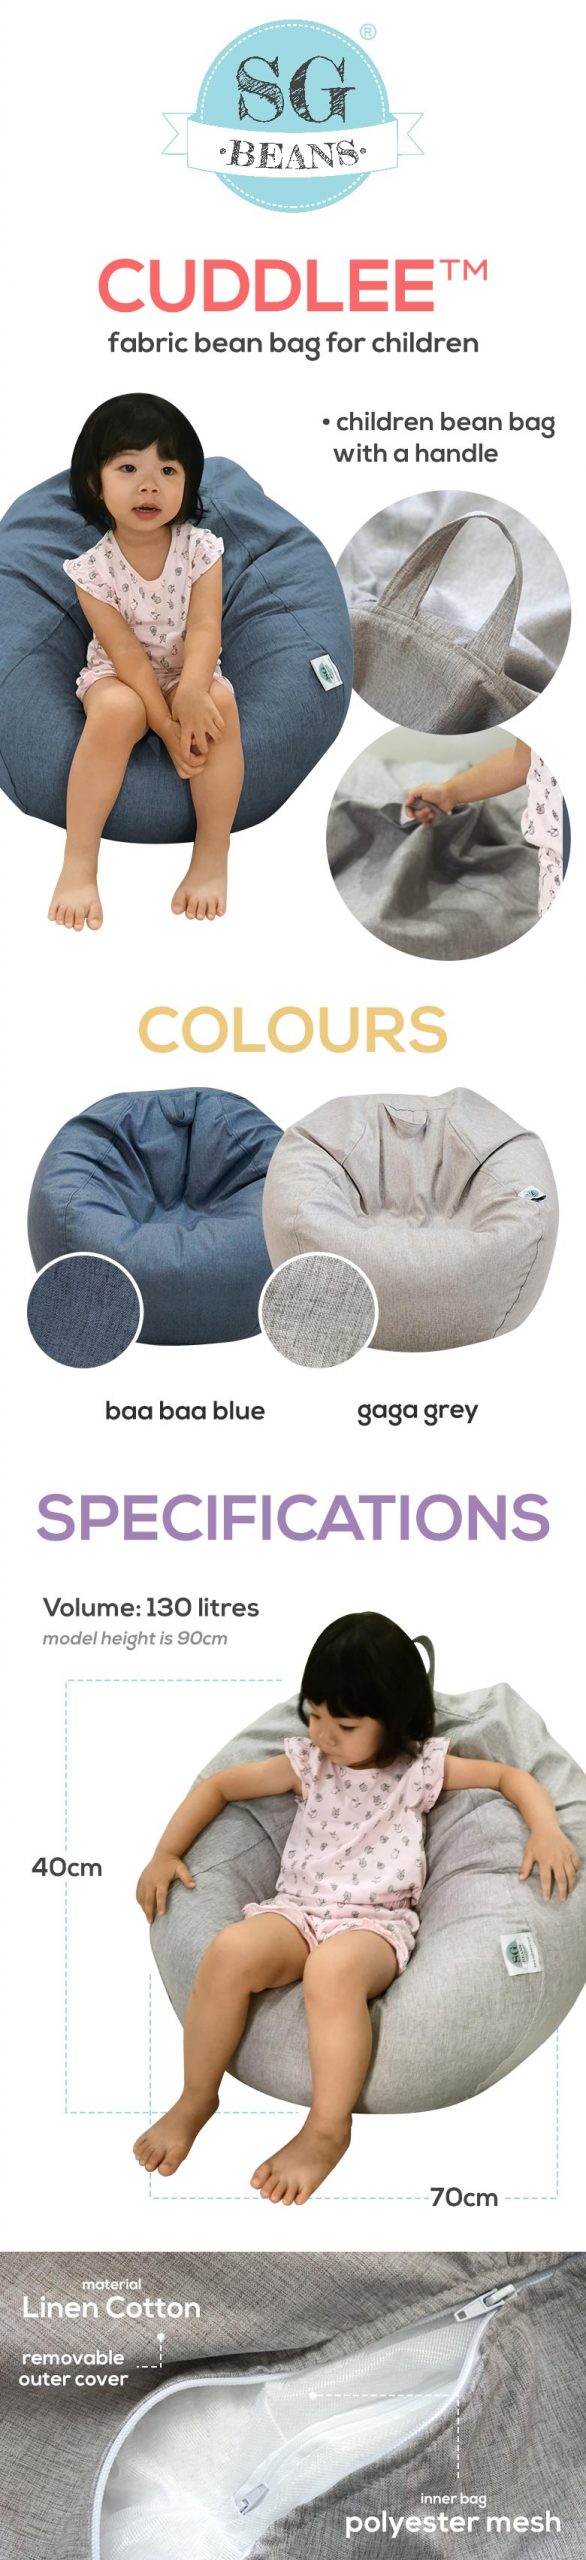 cuddlee bean bag for children and kids singapore